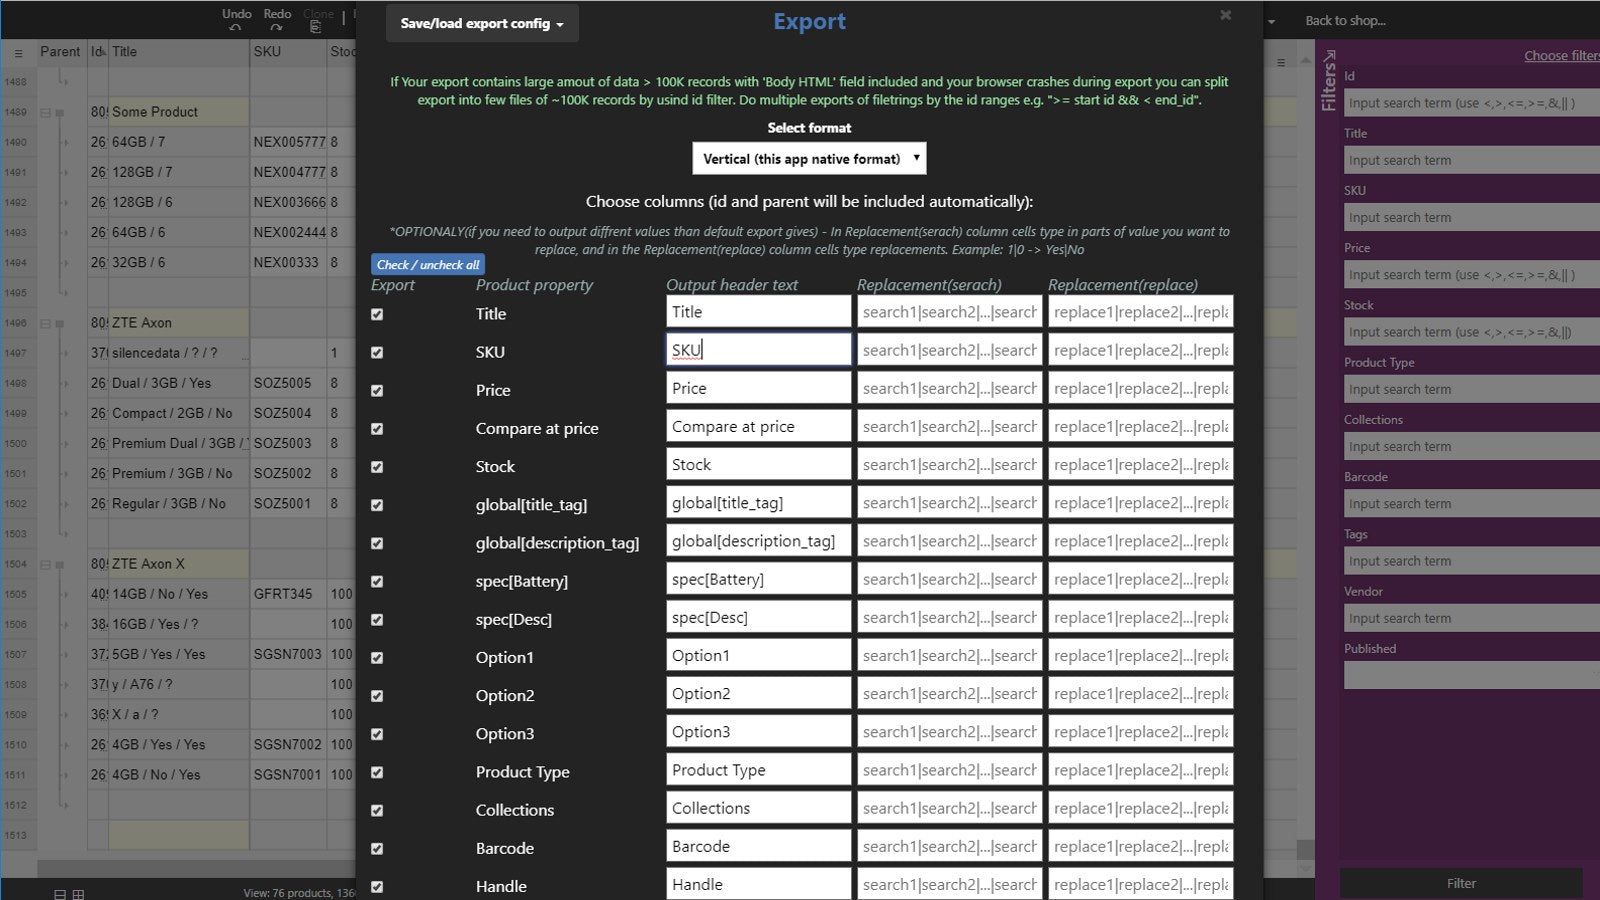 Custom export. You can specify columns to export.